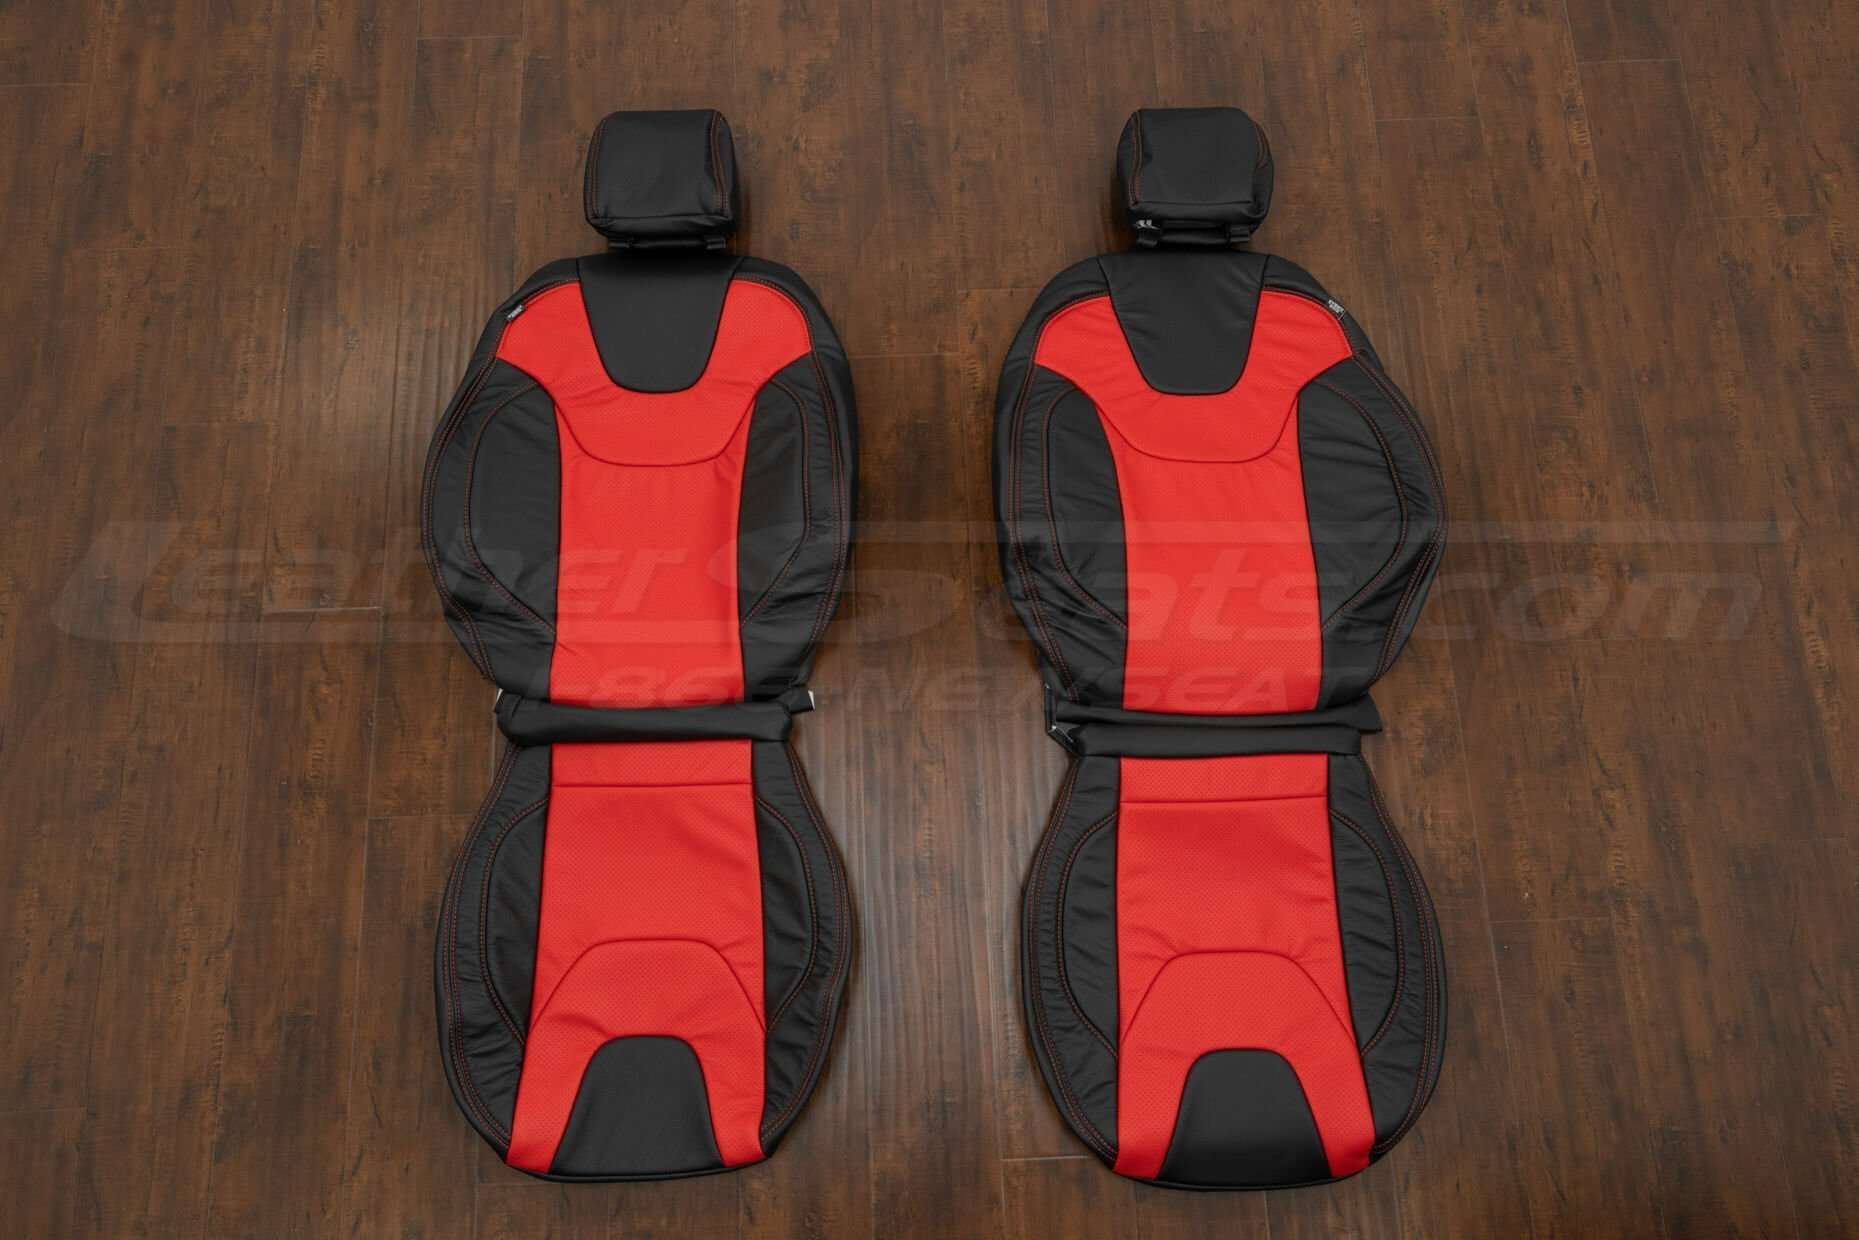 2015-2018 Ford Focus Custom Leather Seat Kit - Black & Bright Red - Front seat upholstery